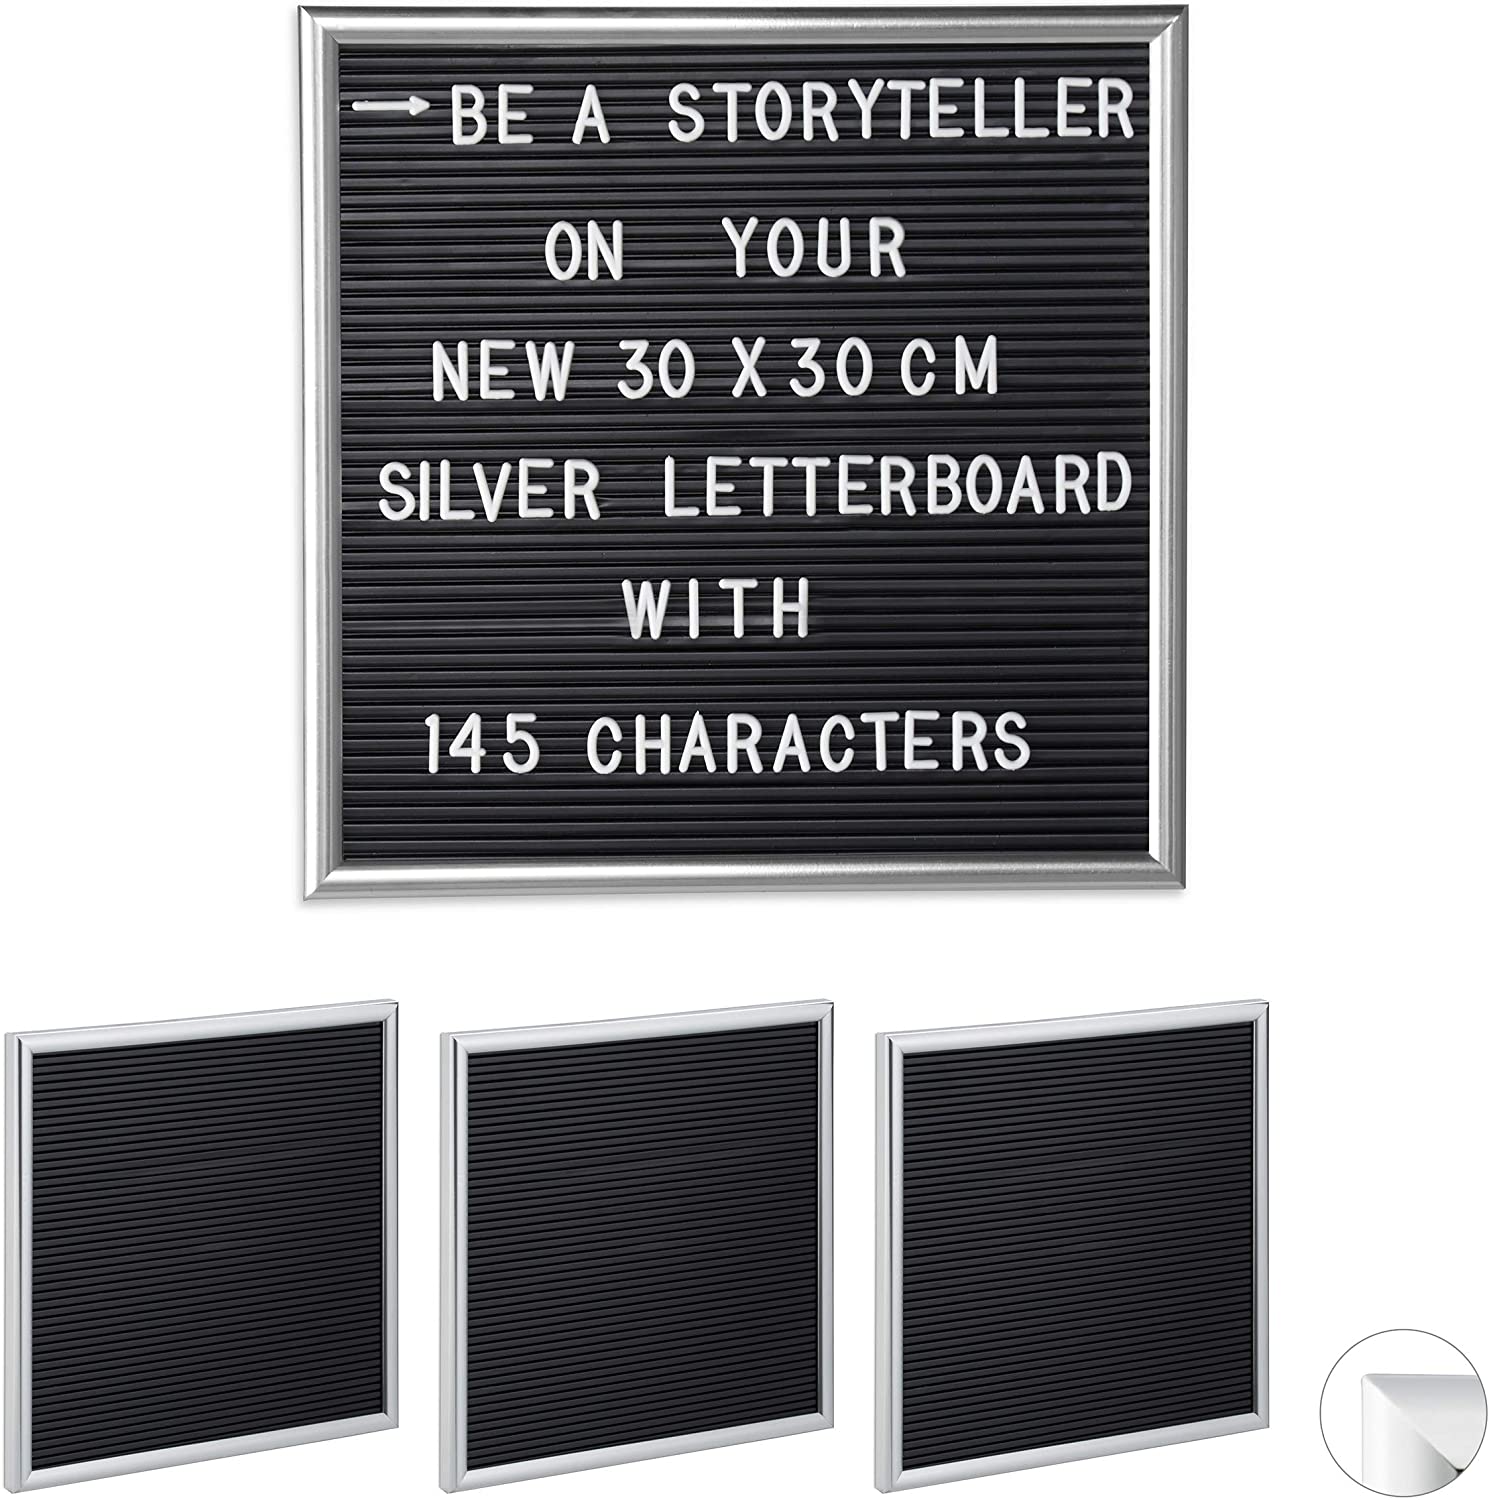 Relaxdays 4 x Letter Board, 145 Letters, Numbers, Special Characters, 30 x 30 cm, Letter Board for Sticking, Plastic, Silver